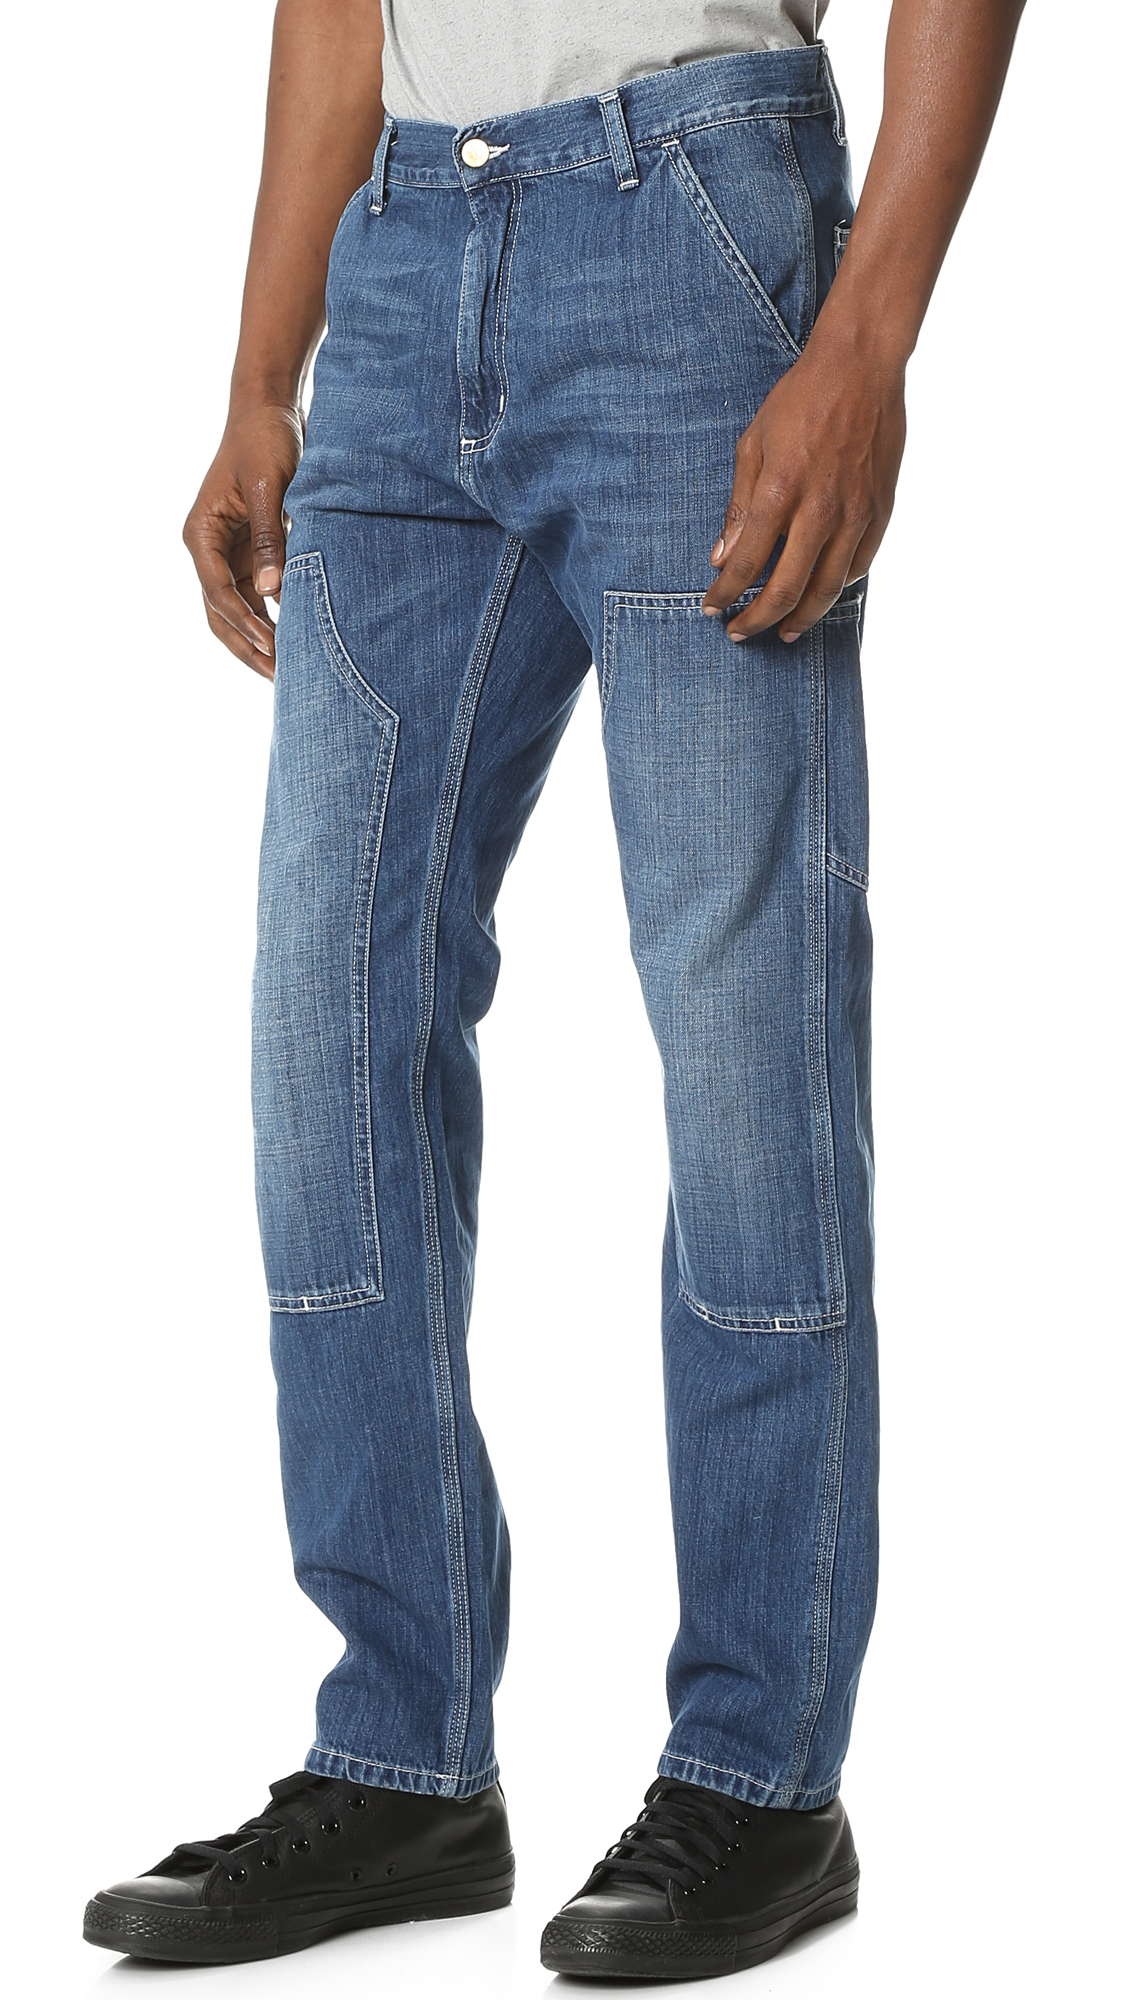 Carhartt WIP Ruck Double Knee Strand Washed Jeans in Blue for Men - Lyst